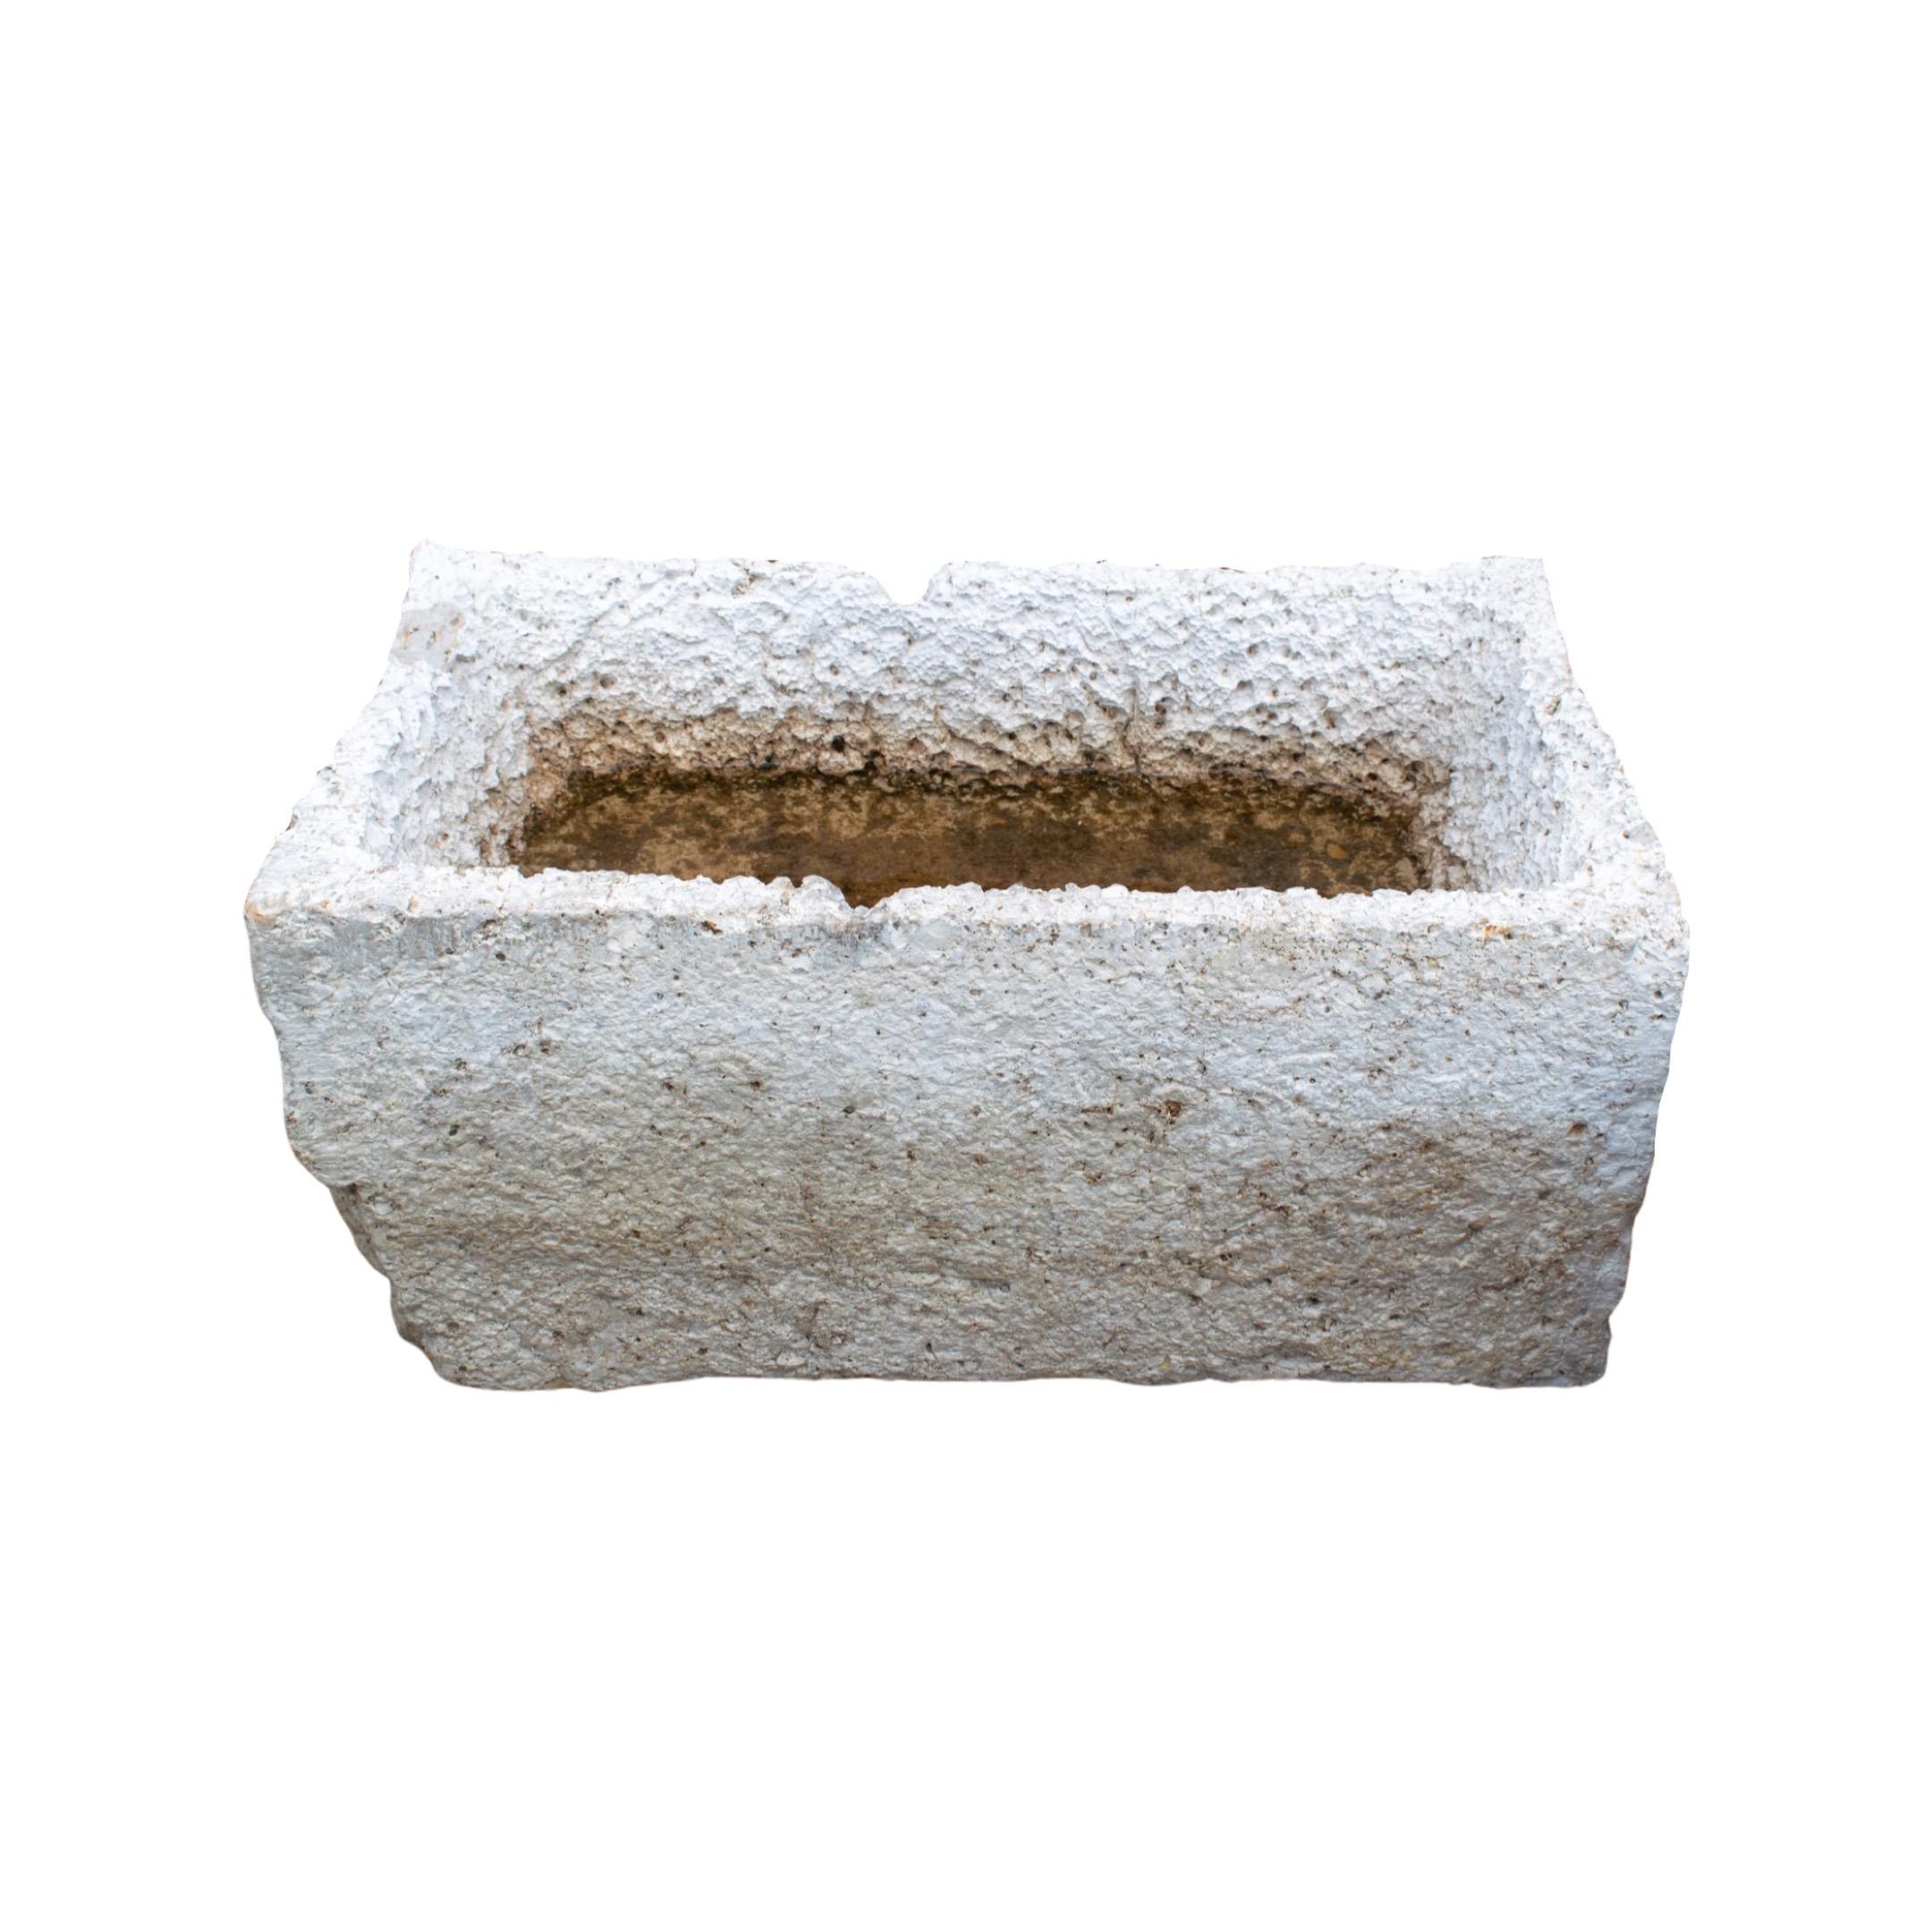 Small farm style trough. Made out of limestone. Originates from France. Circa, 18th century. 
?

??A small farm trough is a compact version of the traditional farm trough that was used for practical purposes on farms such as watering animals or